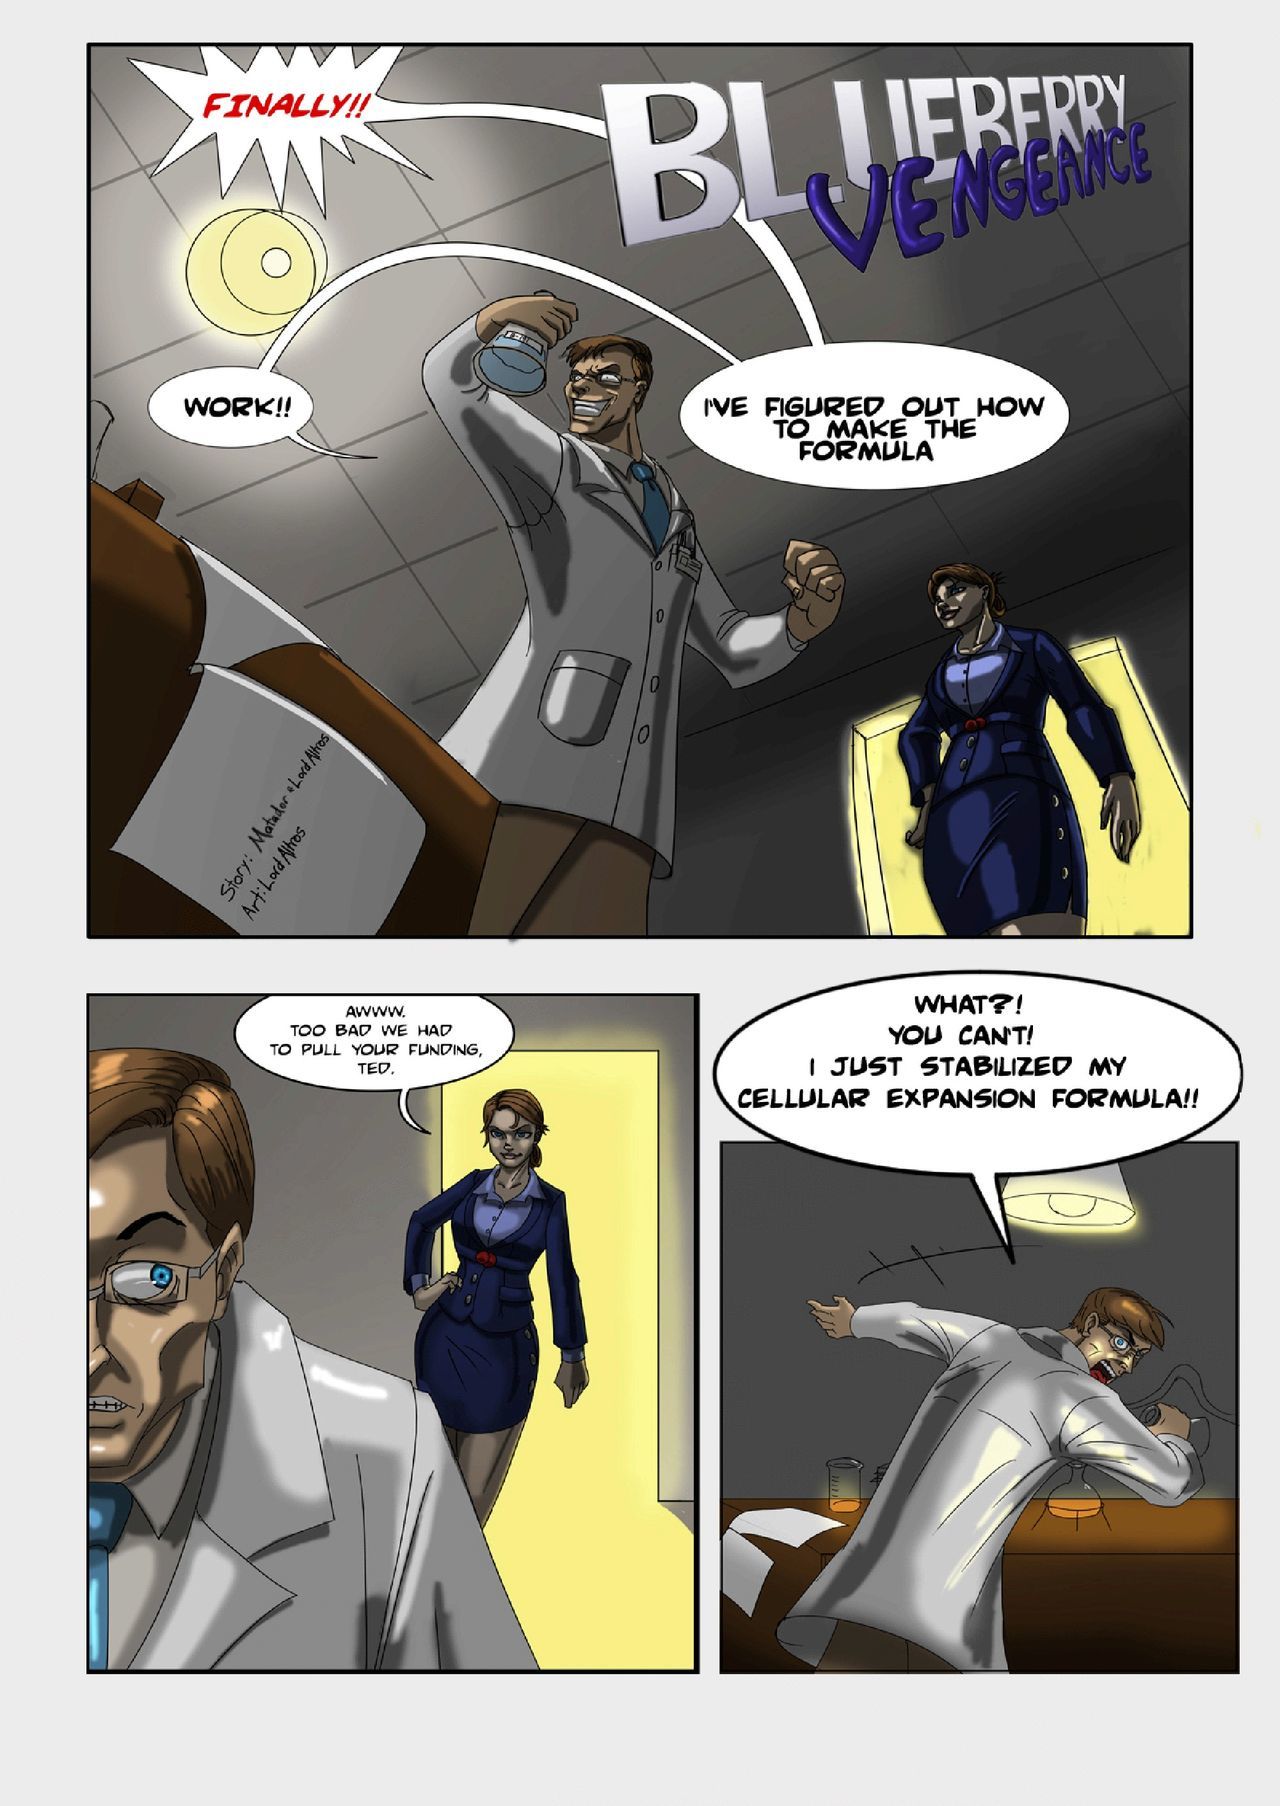 Blueberry Vengeance by LordAltros page 2